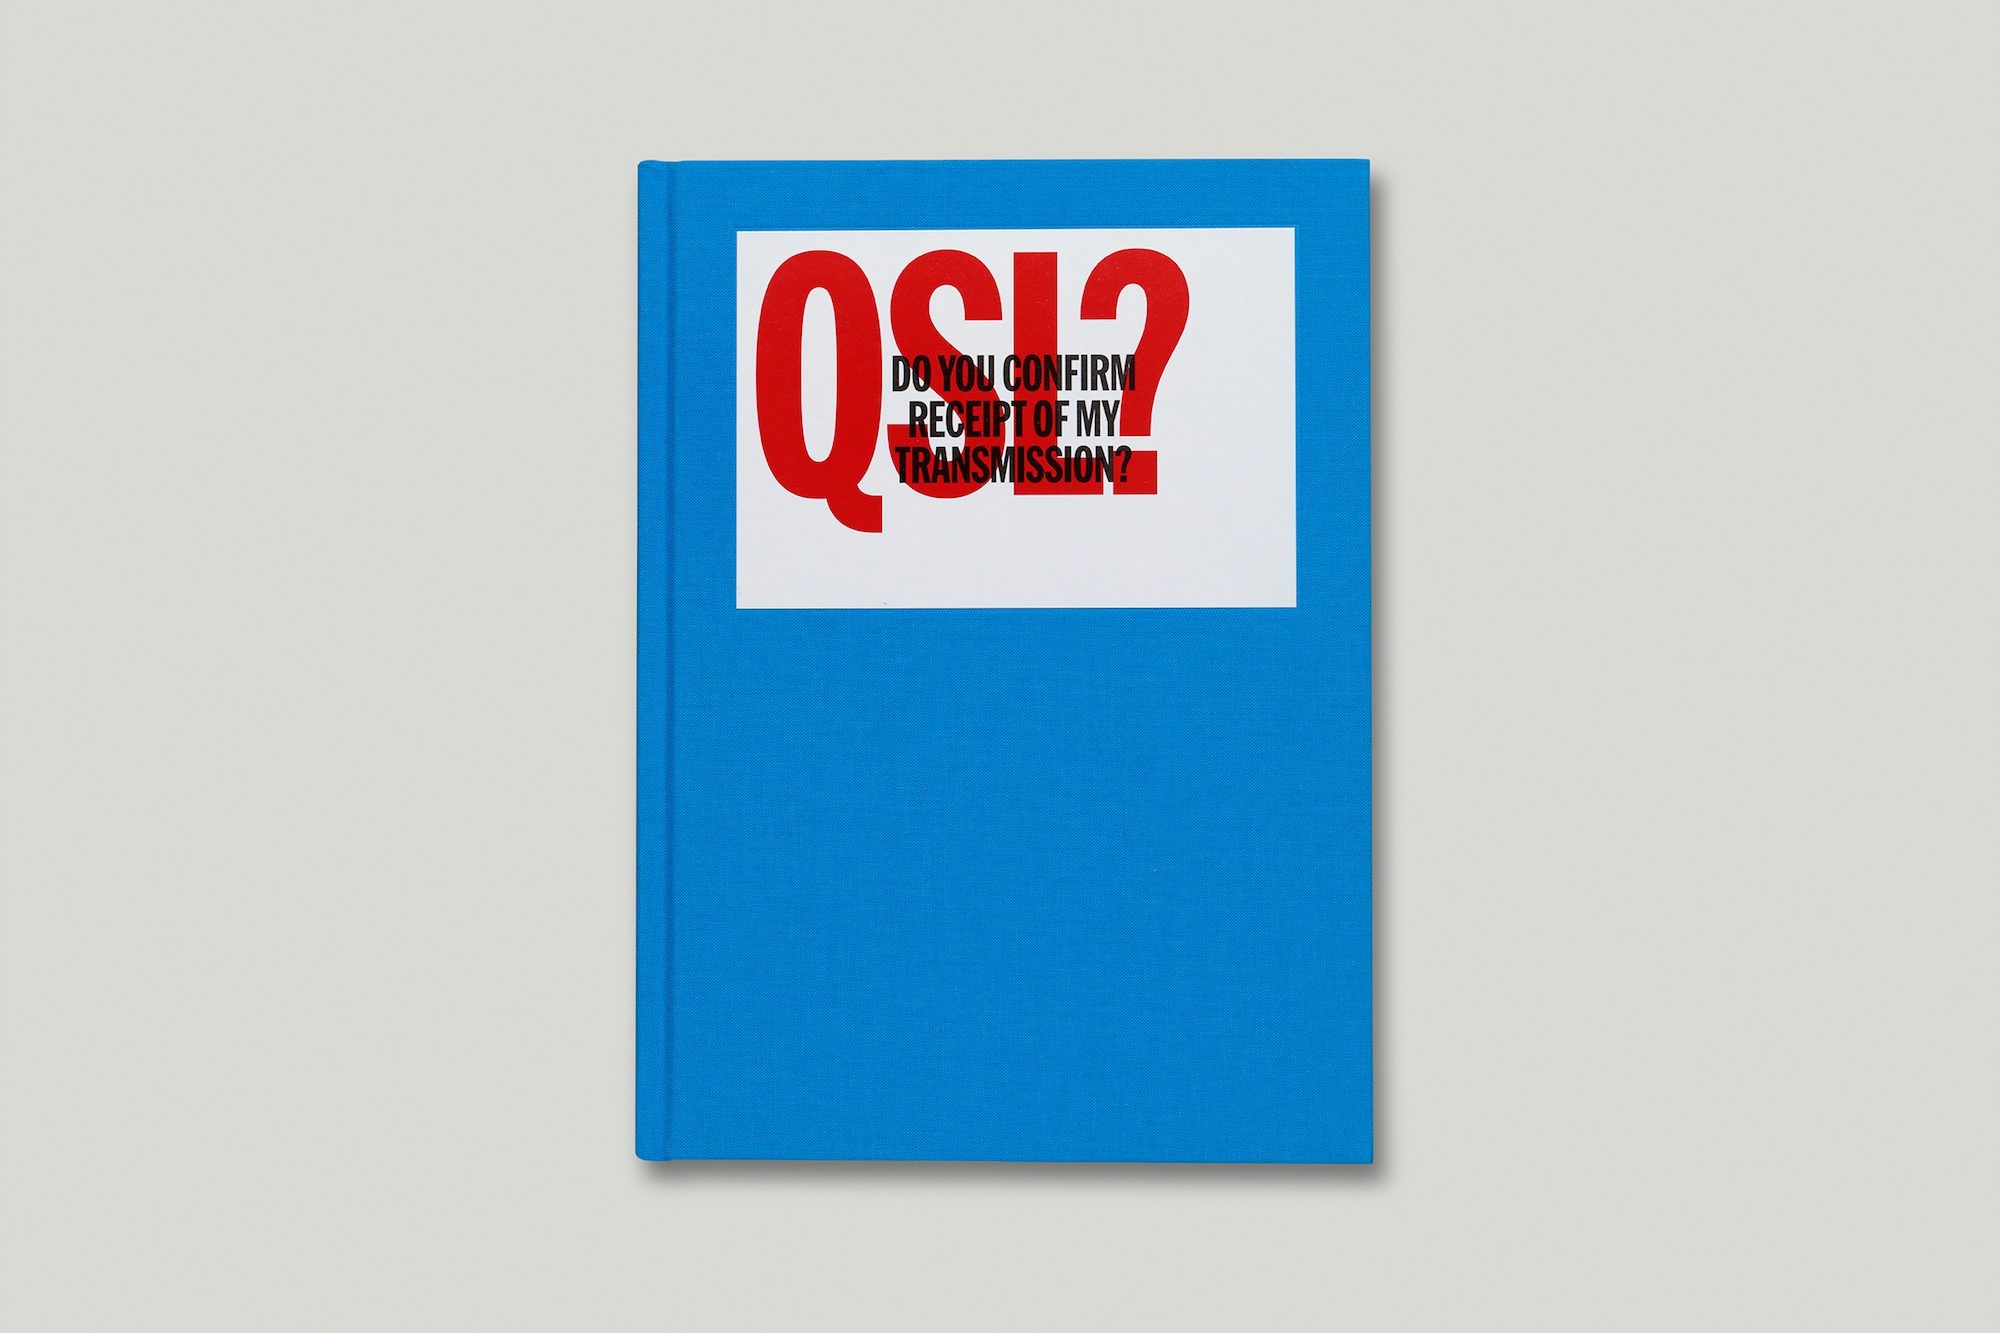 QSL? (Do You Confirm Receipt of My Transmission?), published by Standards Manual